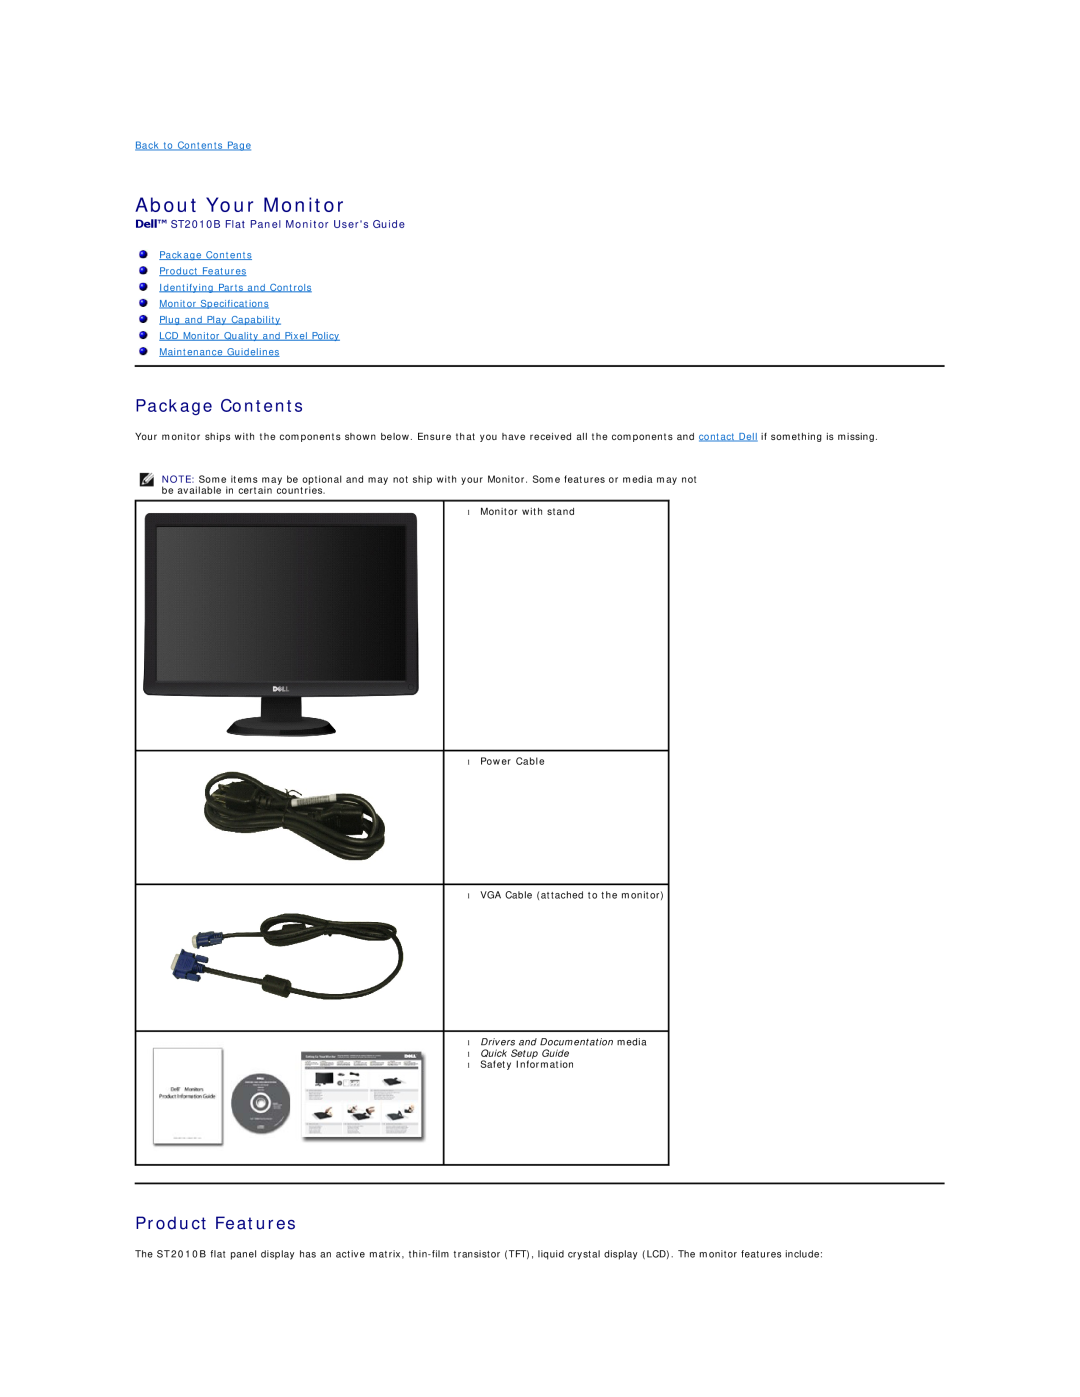 Dell appendix About Your Monitor, Package Contents, Product Features, Dell ST2010B Flat Panel Monitor Users Guide 